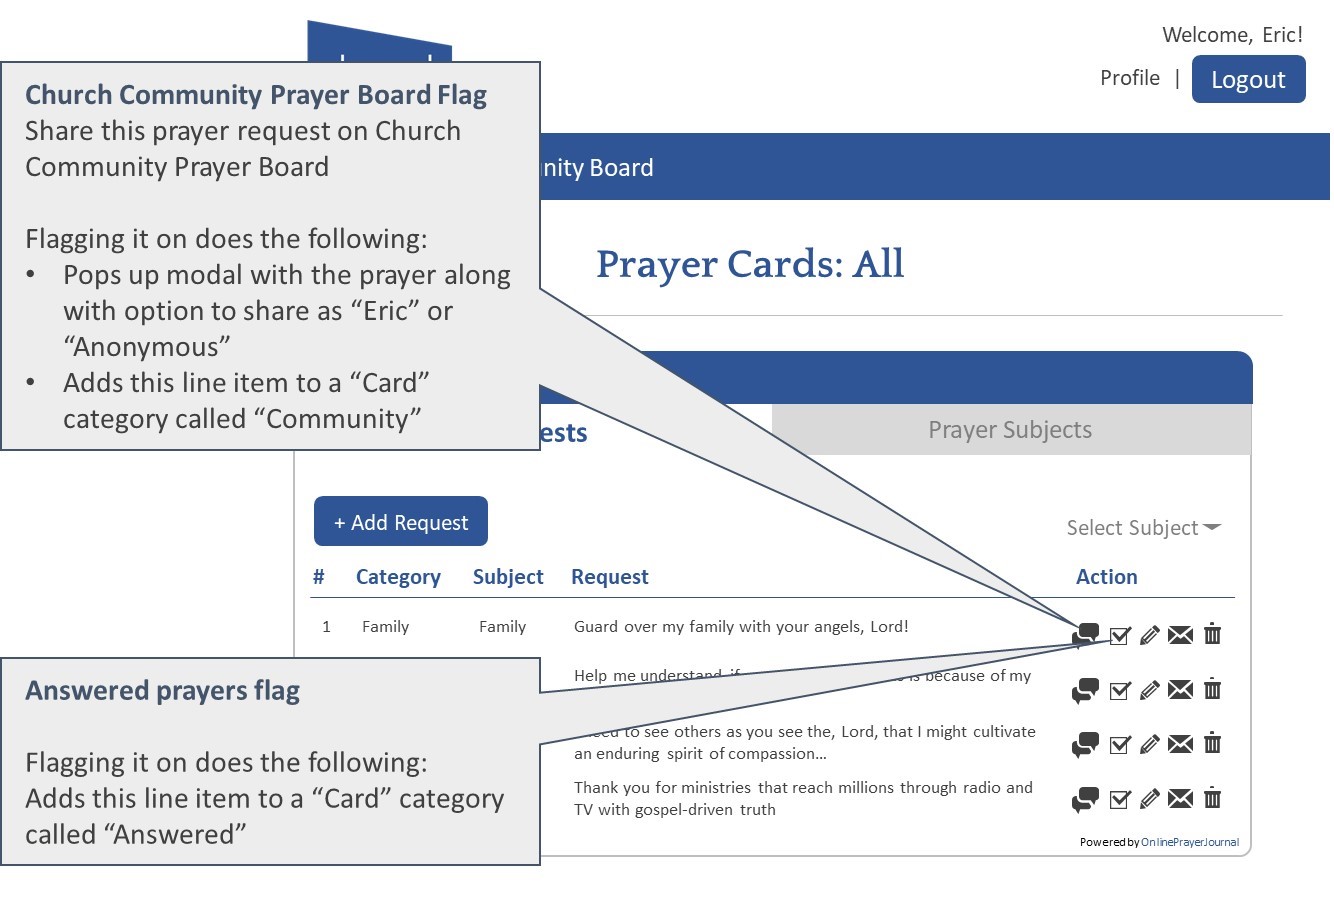 Church Community Answered Prayers Flags - How to Grow Your Church Effortlessly with Technology